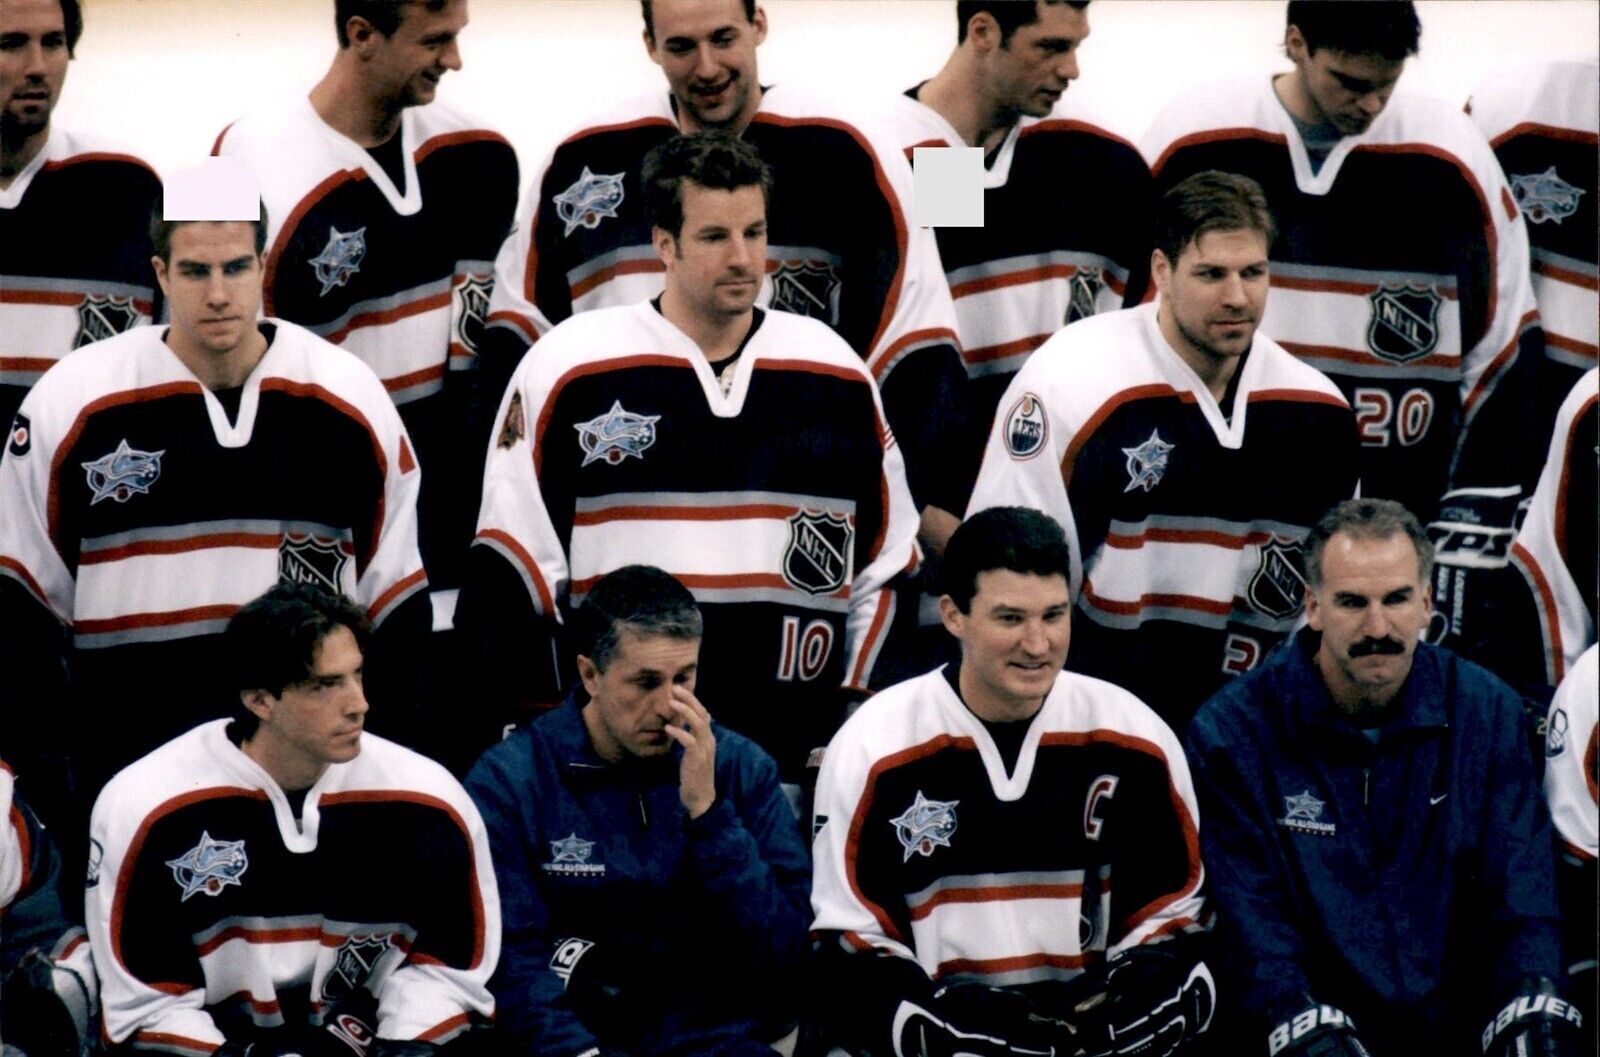 PF37 2001 Orig Photo HOCKEY ALL-STAR GAME S. GAGNE T. AMONTE D. WEIGHT J. SAKIC